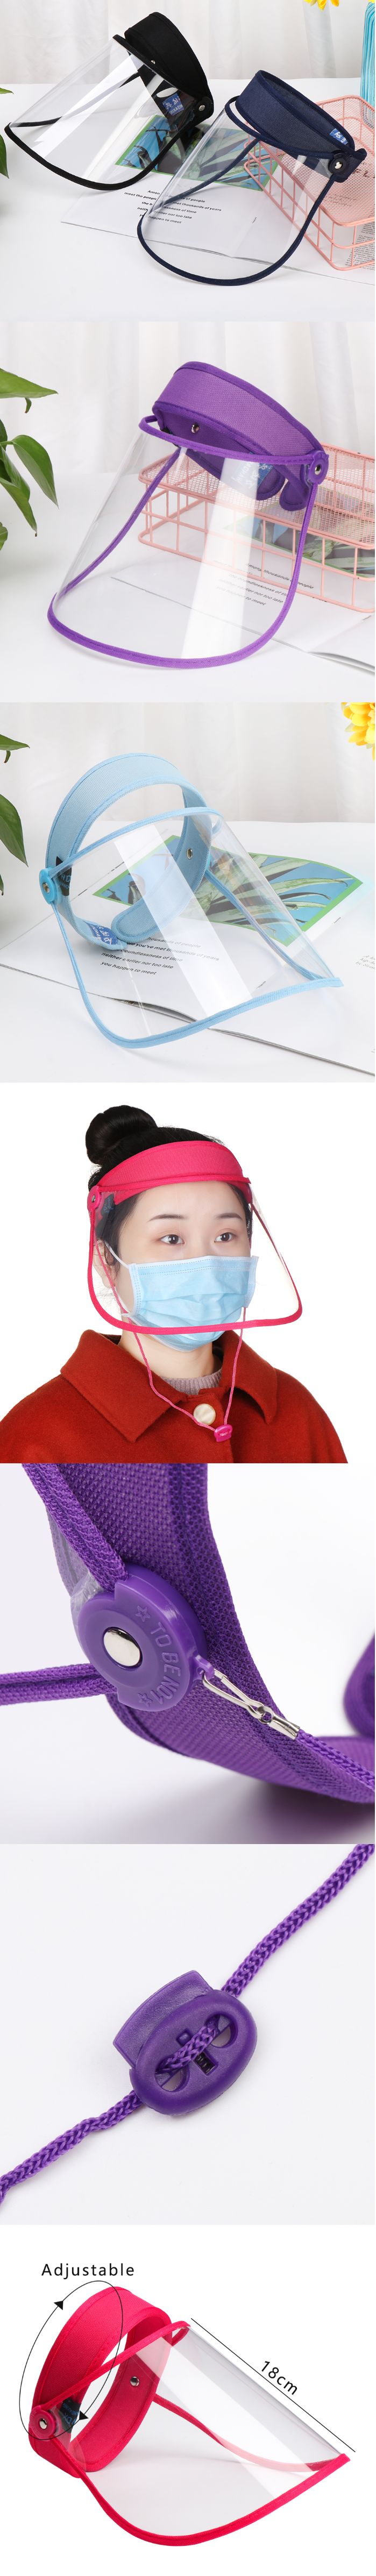 Full Face Shield, Full Face Mask, Safety Shield, Anti Spittle Protection Cover, Face Protective, Anti-spitting Mask, Anti Splash Mask, Face Shield,